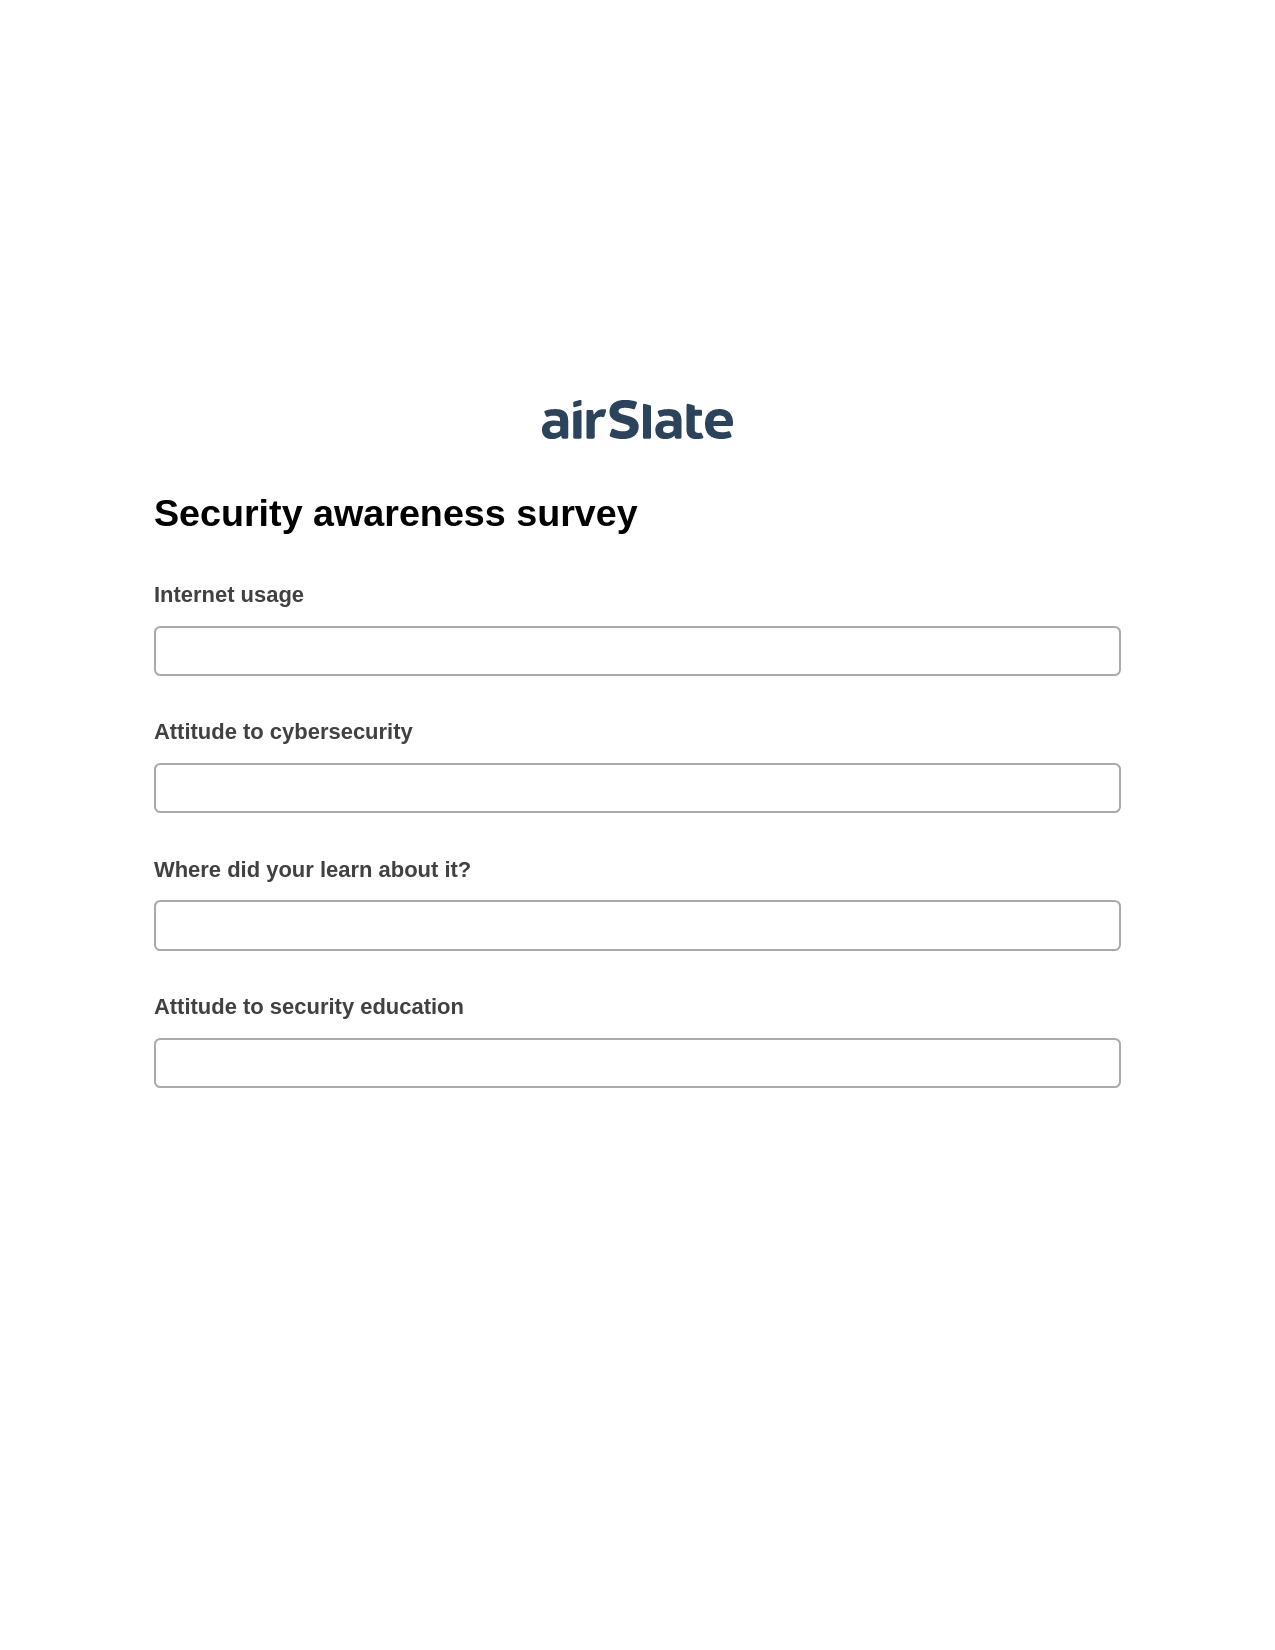 Security awareness survey Pre-fill from MS Dynamics 365 Records DEPRECATED, Lock the slate bot, Dropbox Bot